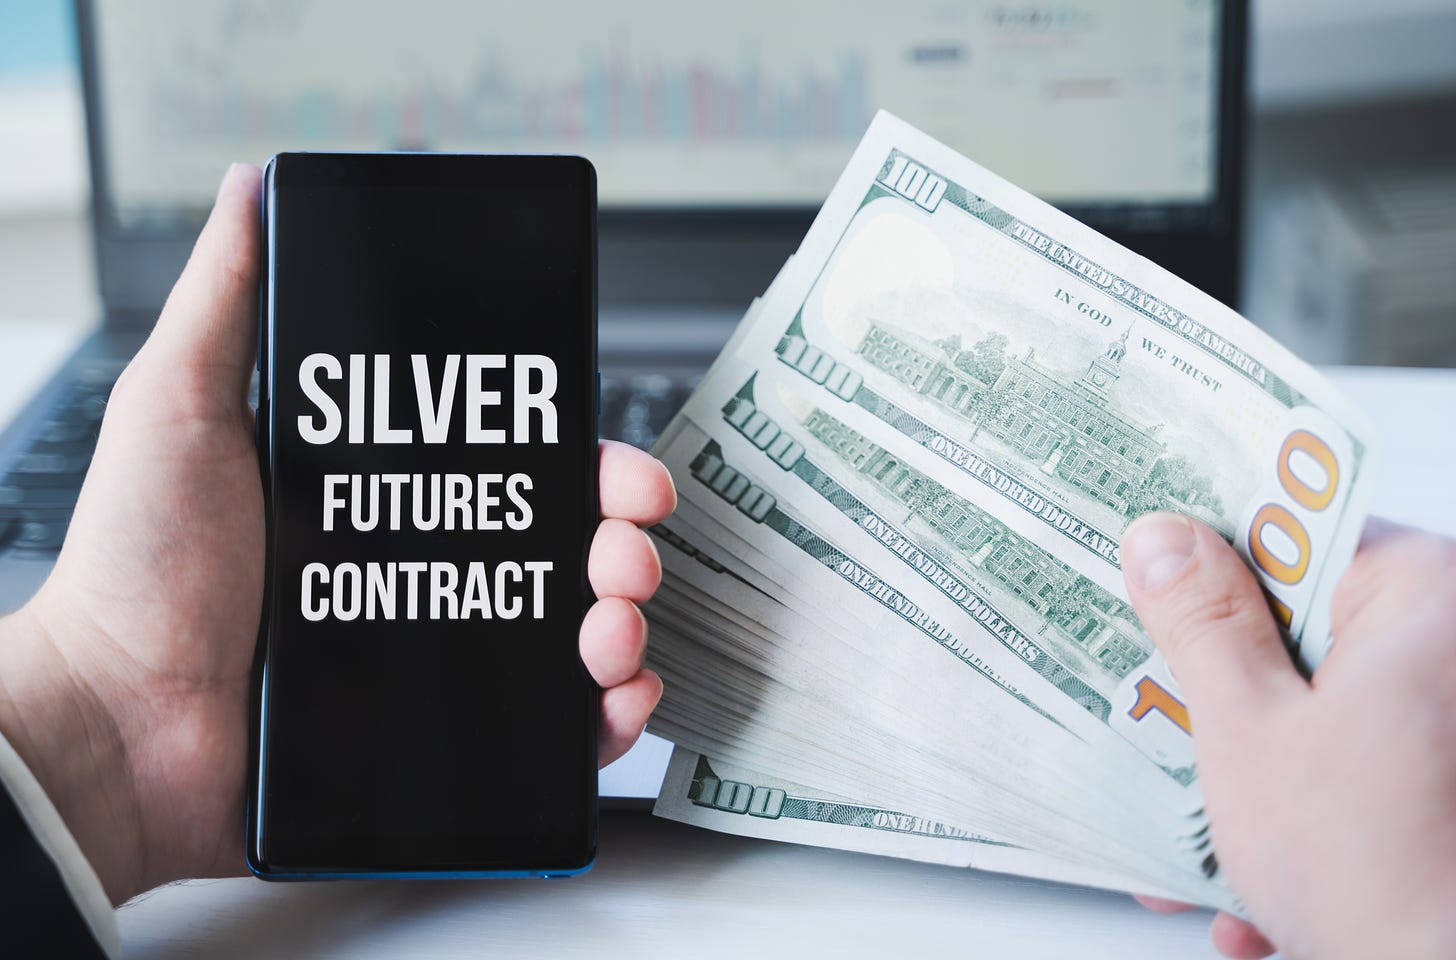 The Truth About Silver Price Manipulation